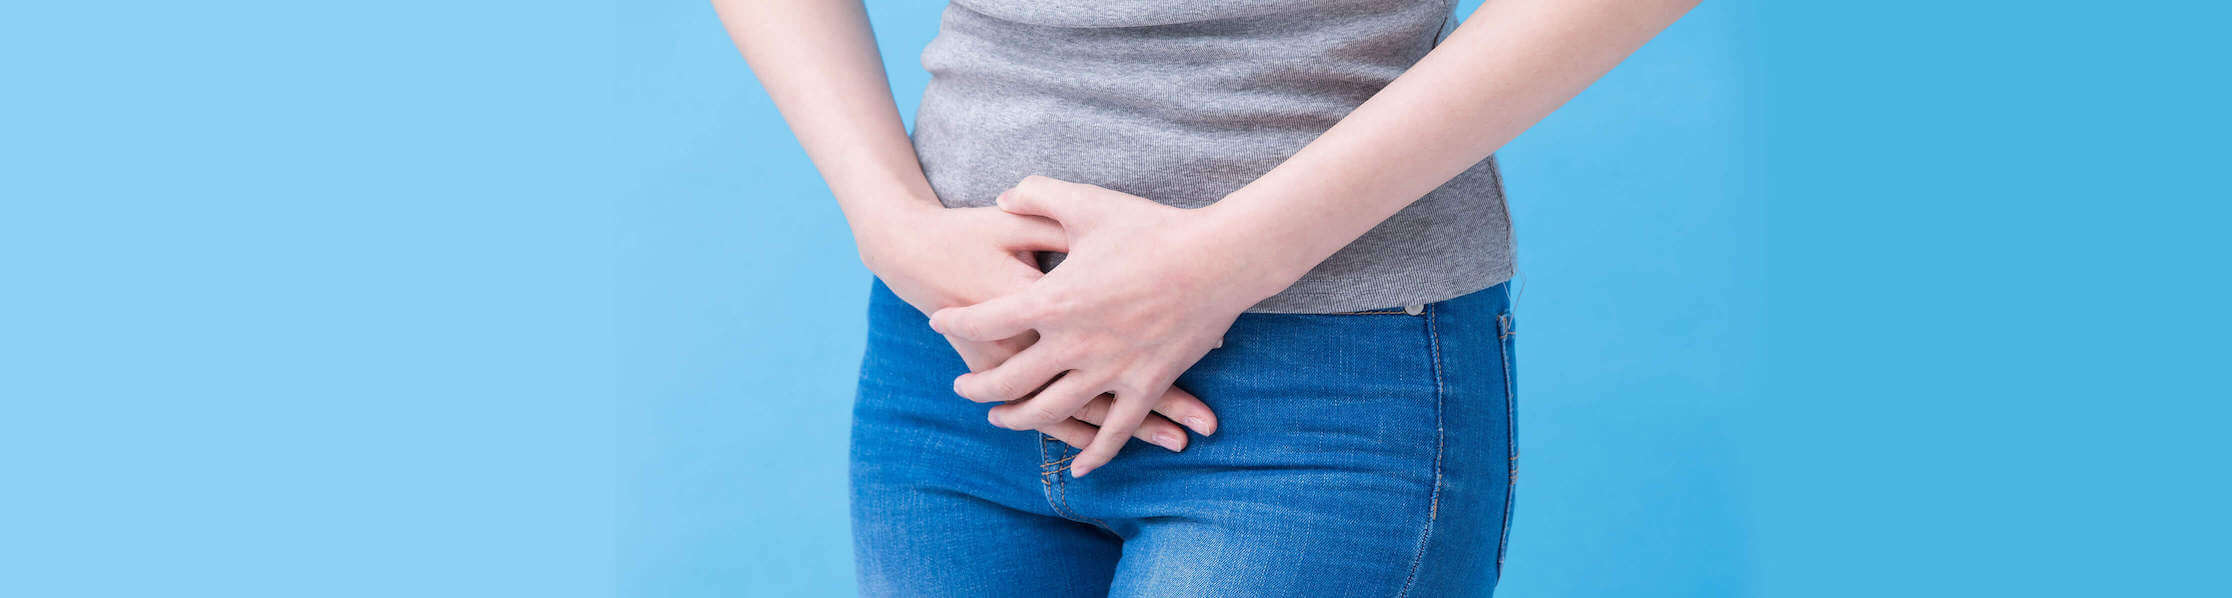 woman in jeans and t-shirt with hands crossed over her pelvic region